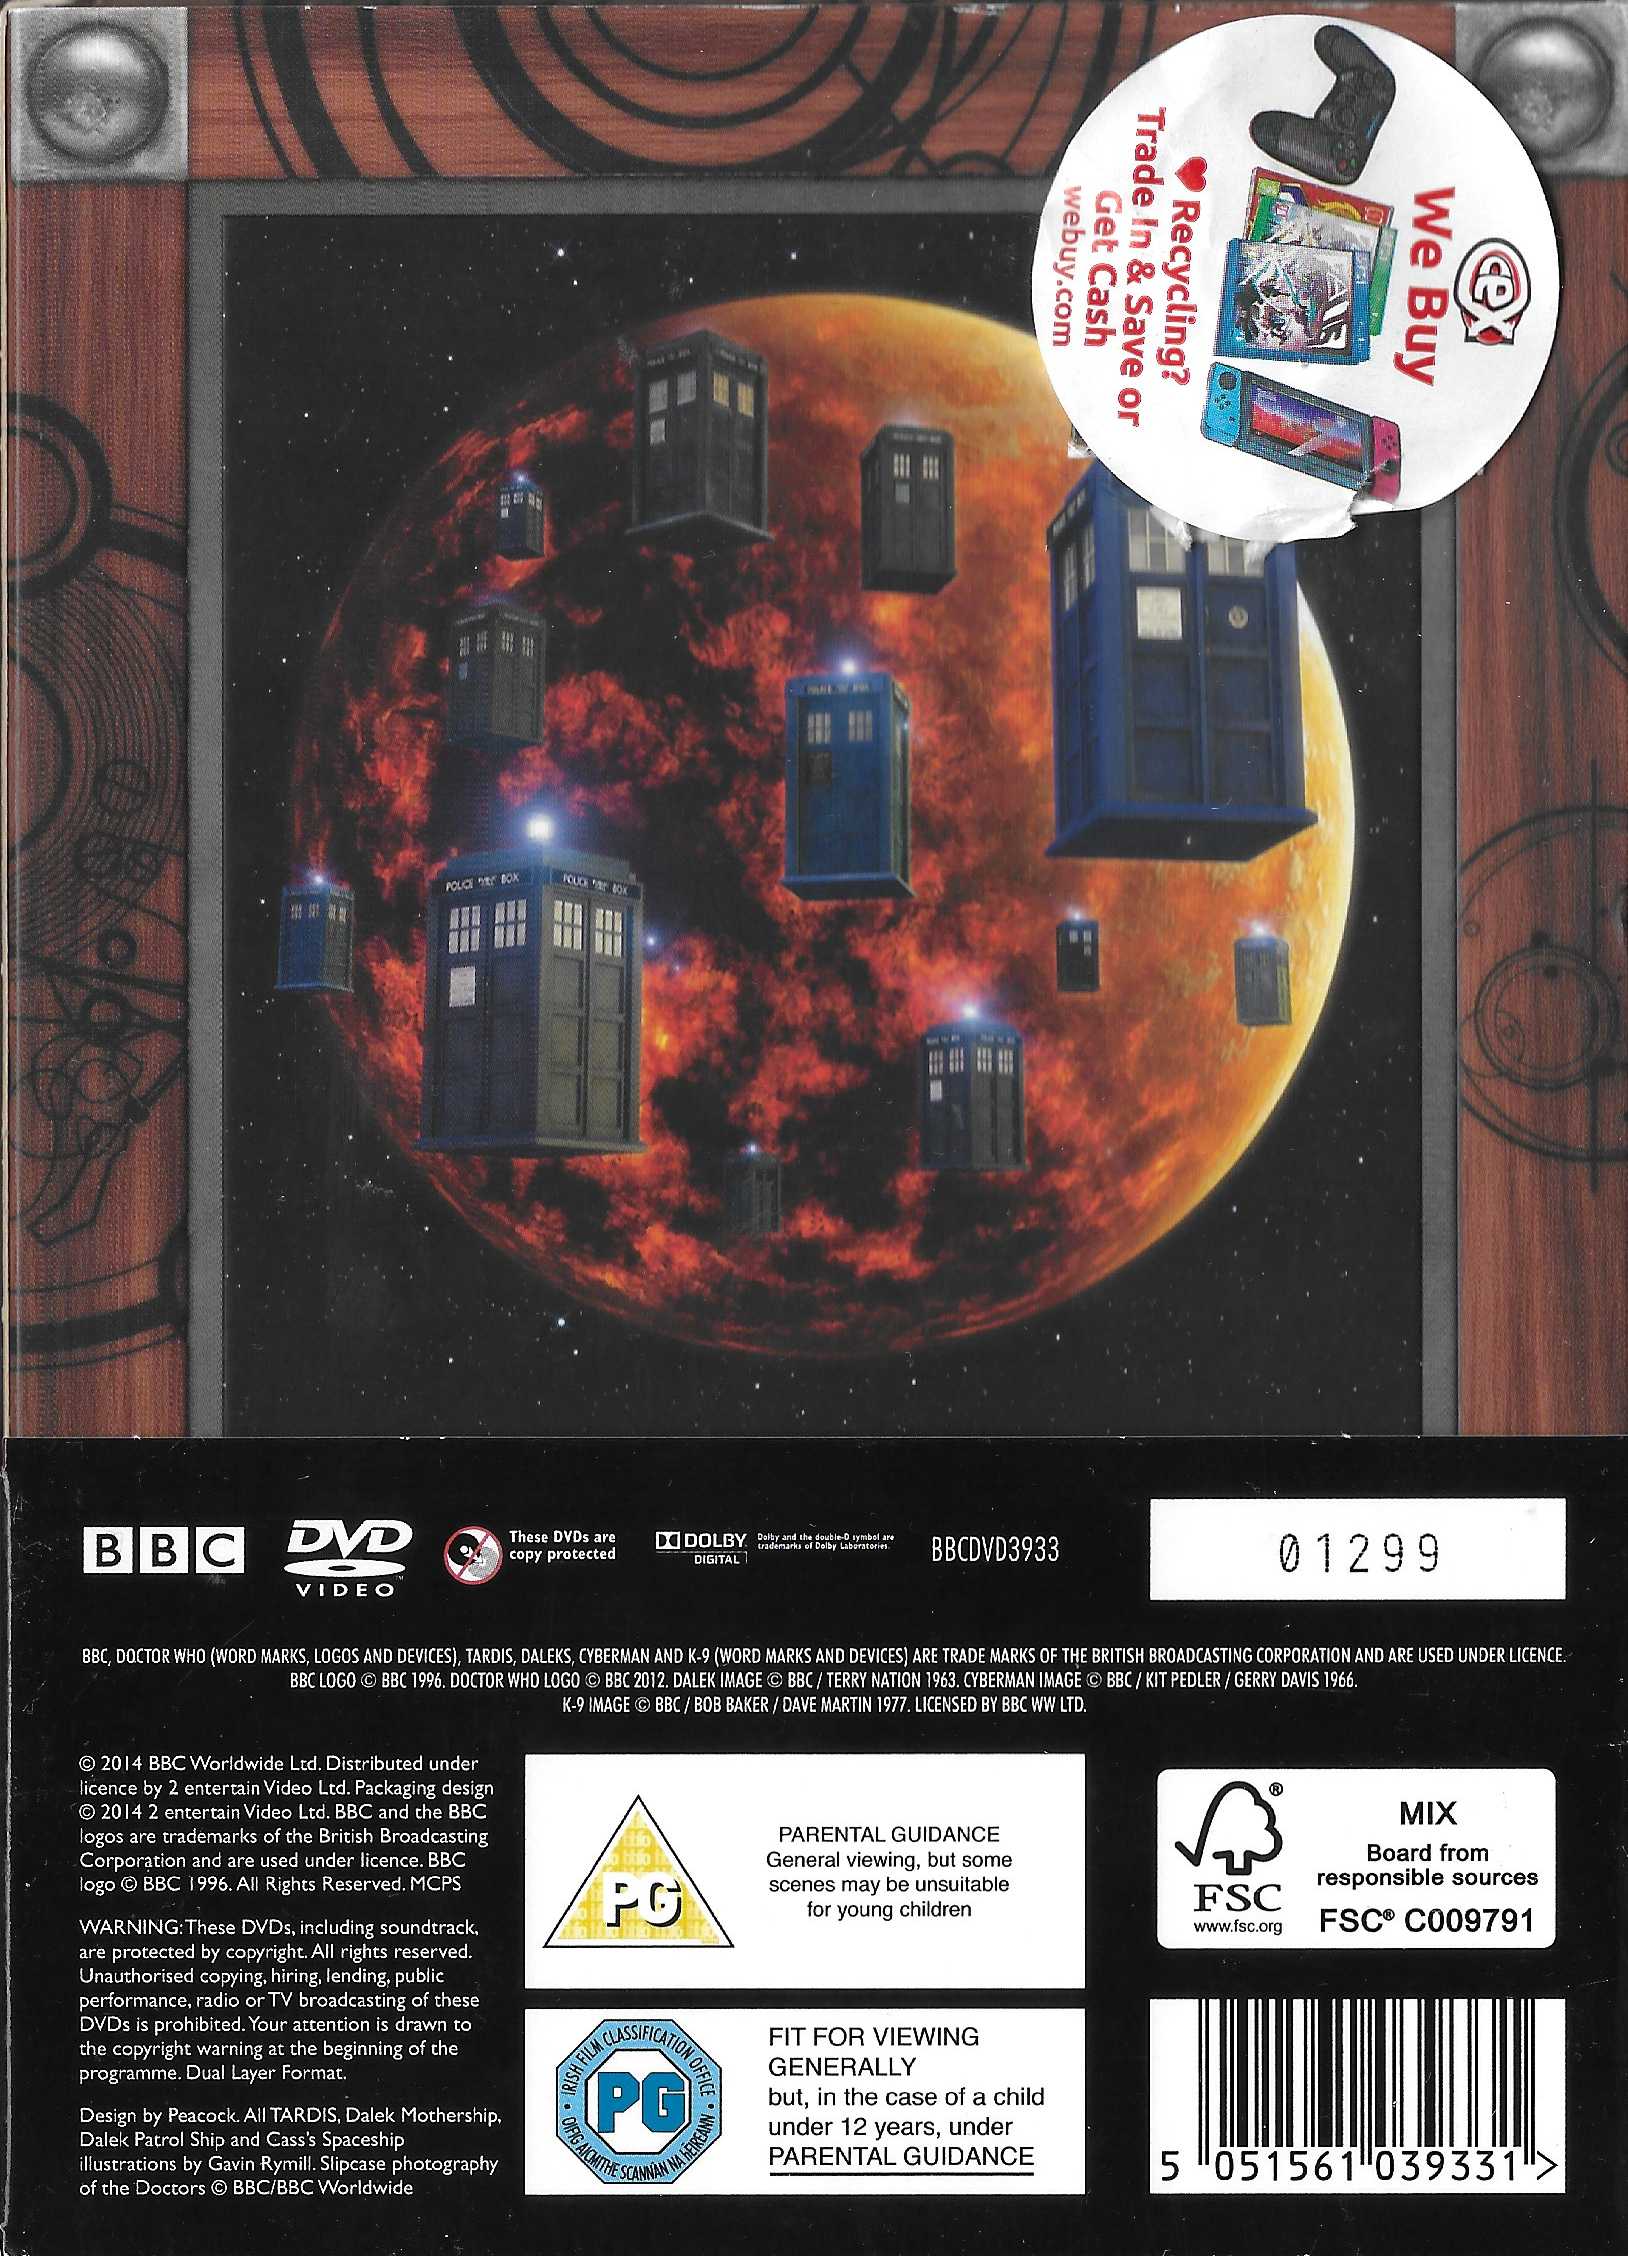 Picture of BBCDVD 3933 Doctor Who - 50th anniversary collector's edition by artist Steven Moffat / Mark Gatiss from the BBC records and Tapes library